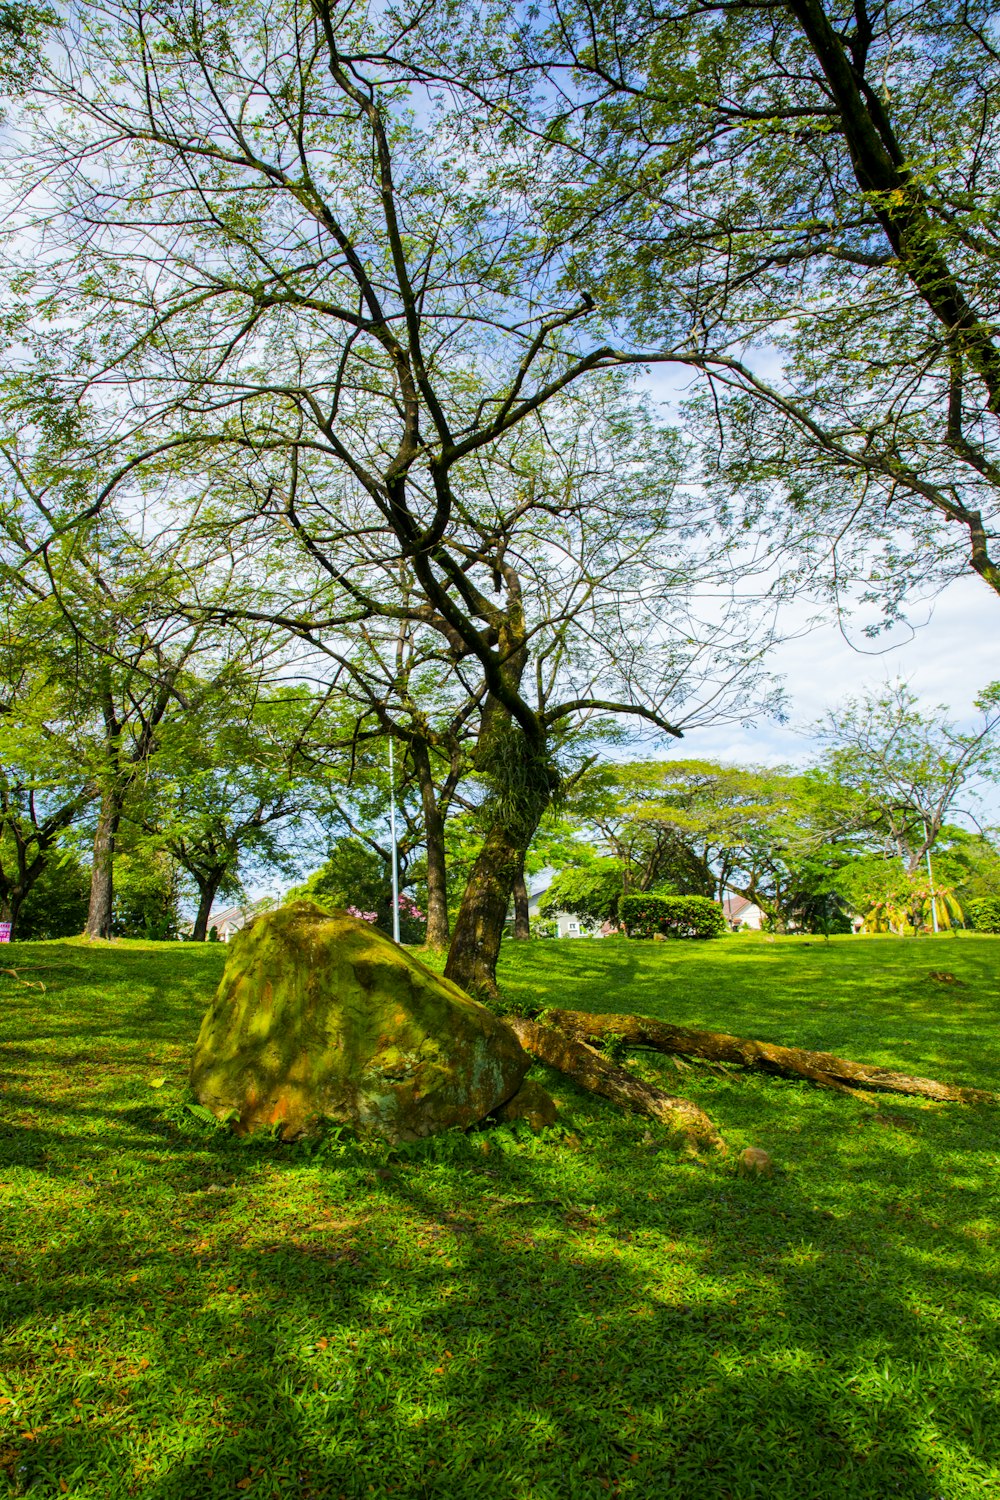 a large rock sitting in the middle of a lush green park